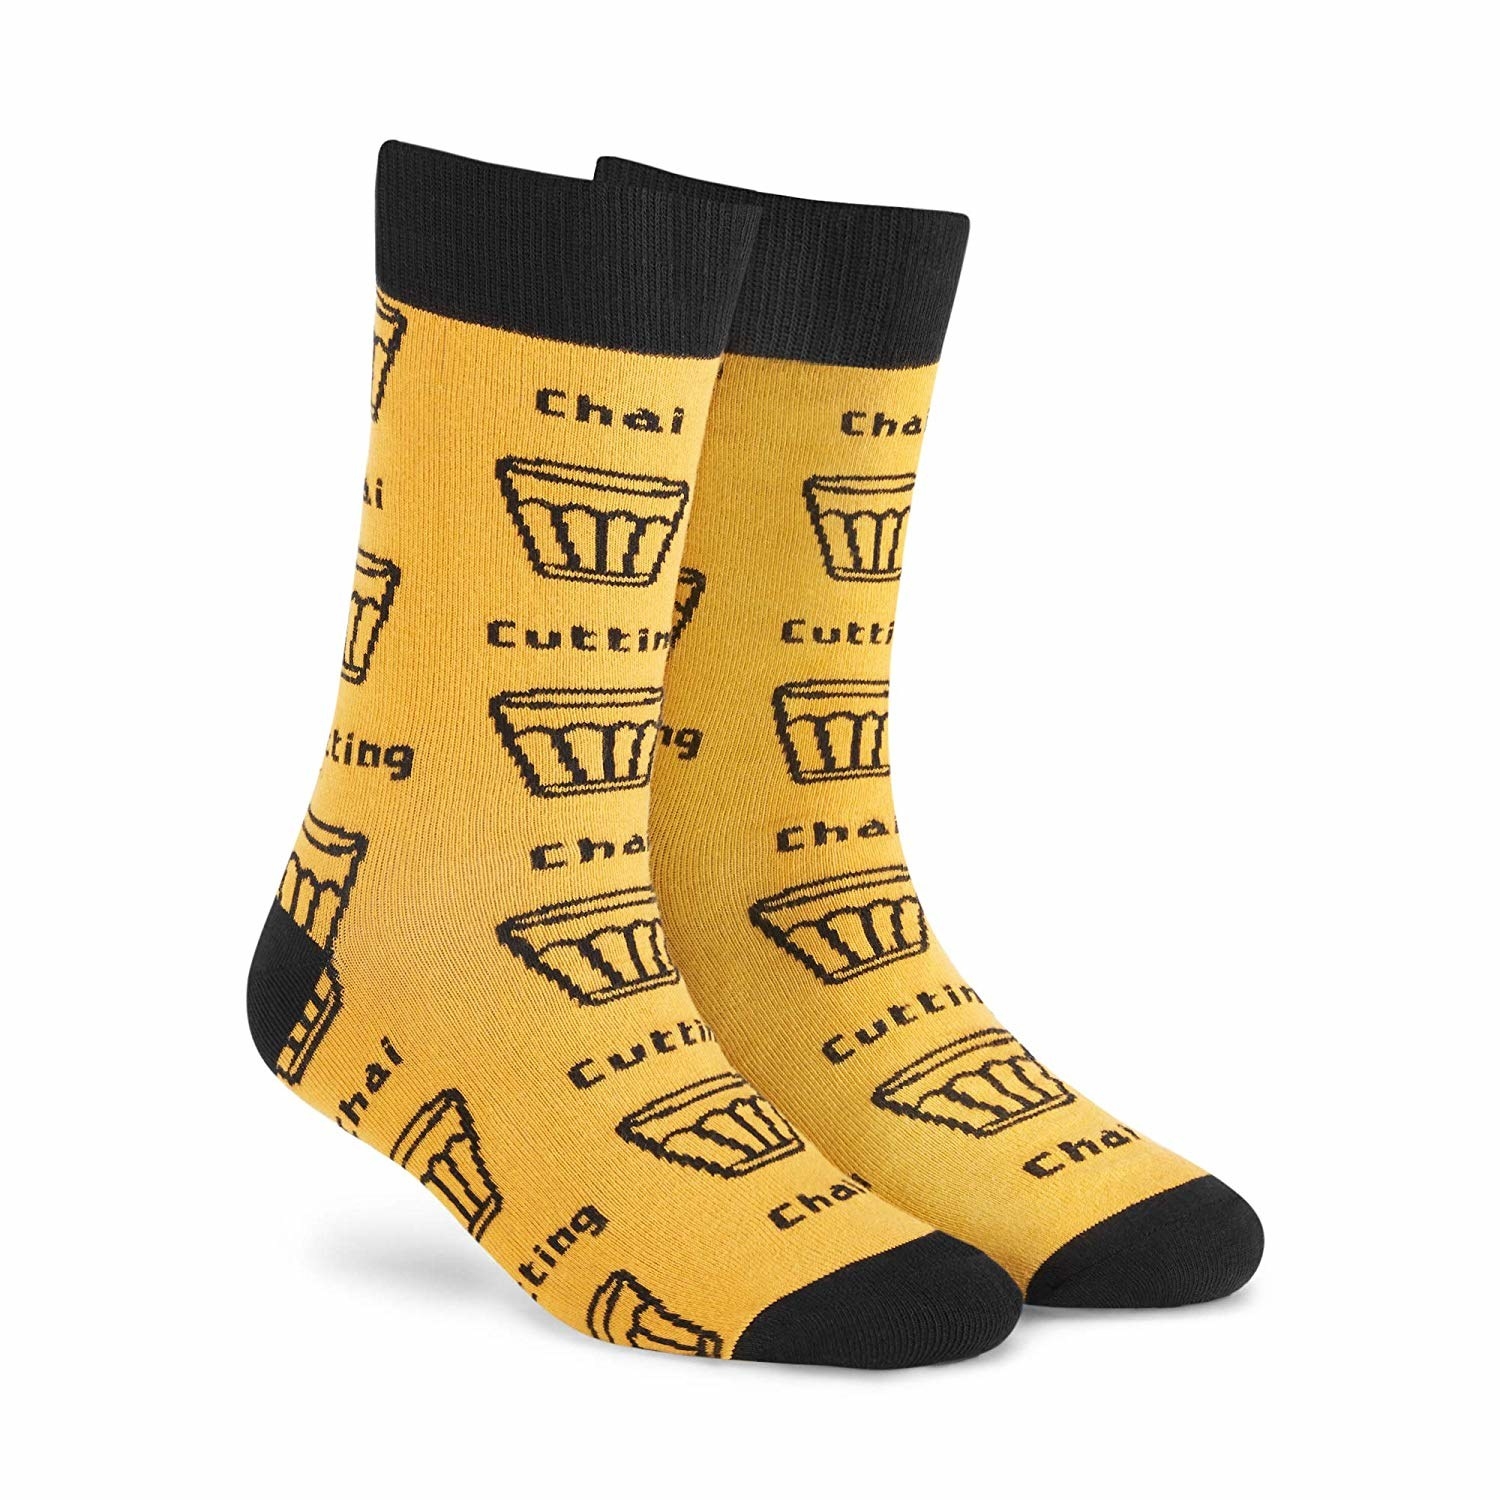 Black and yellow socks with chai glasses and the words &quot;Cutting Chai&quot; printed on them